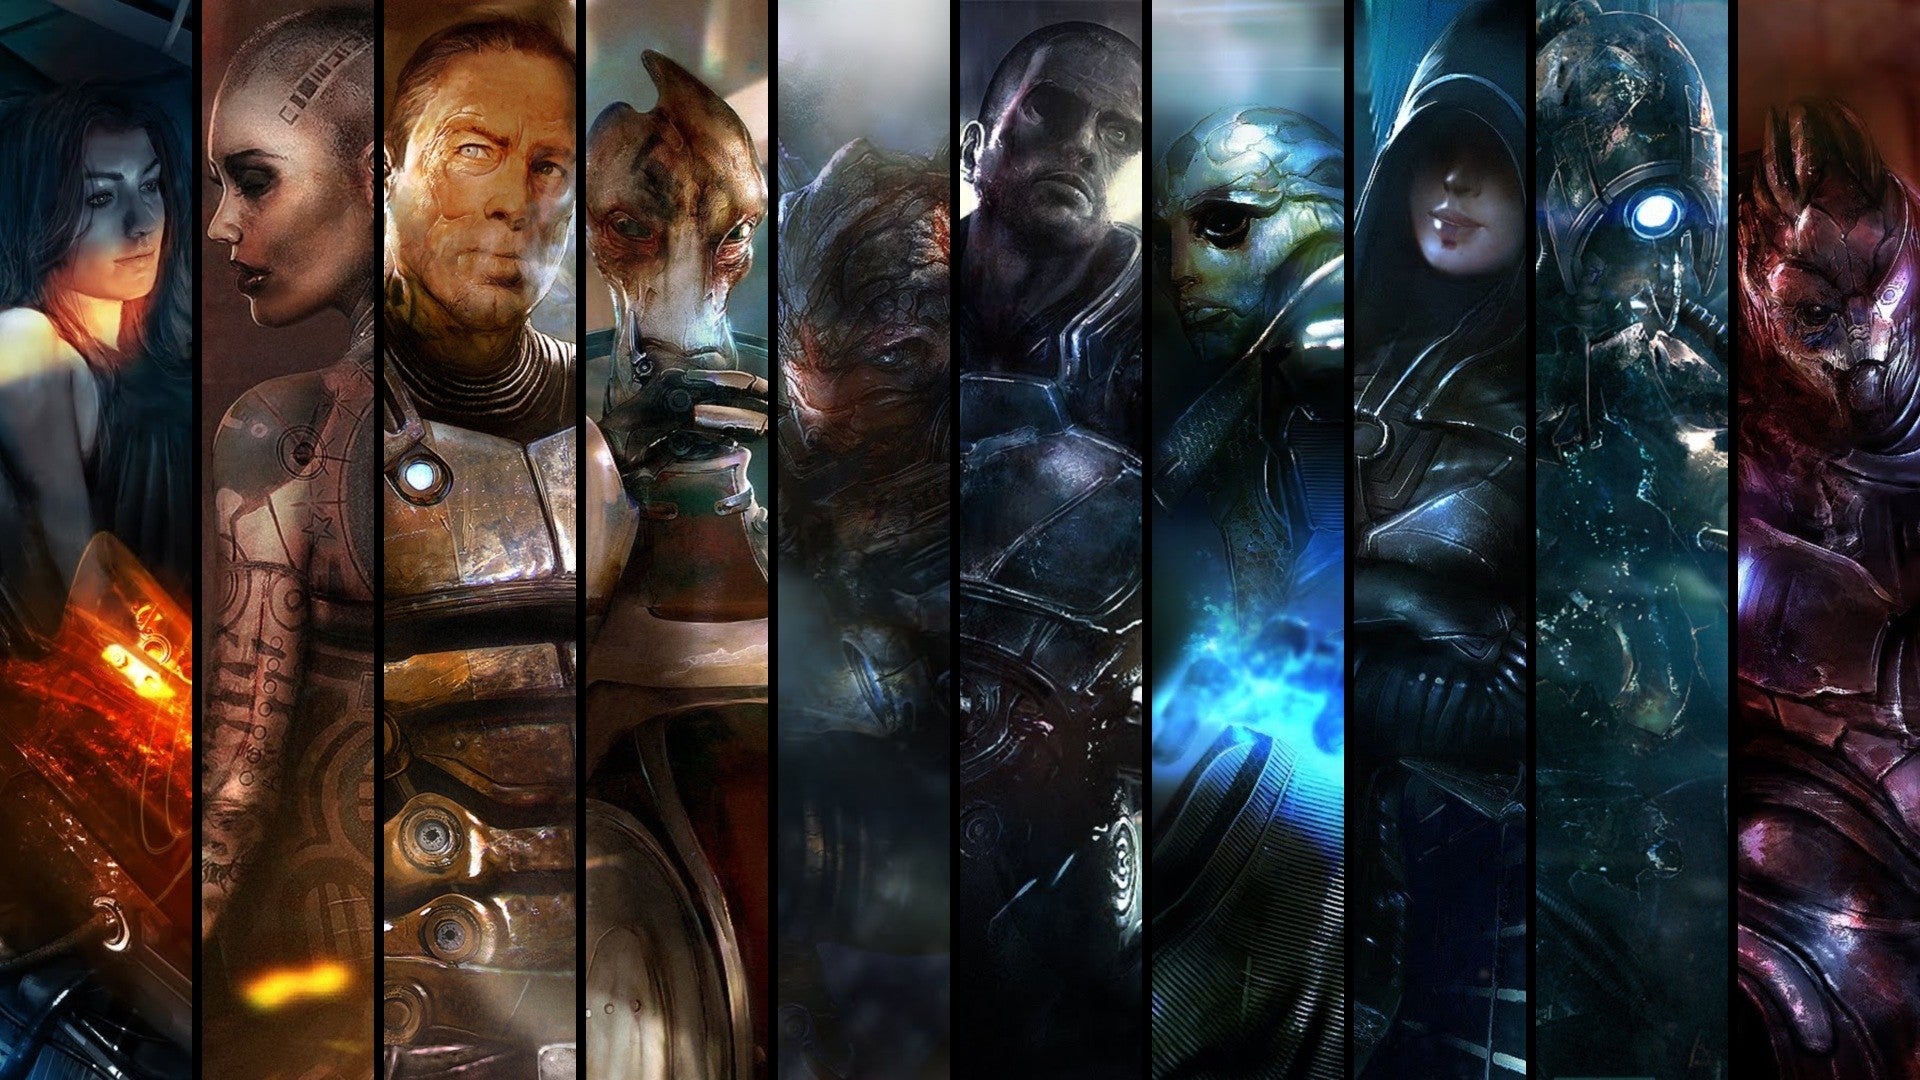 Image for This week’s best game deals: Dark Souls, System Shock 2, Mass Effect and more